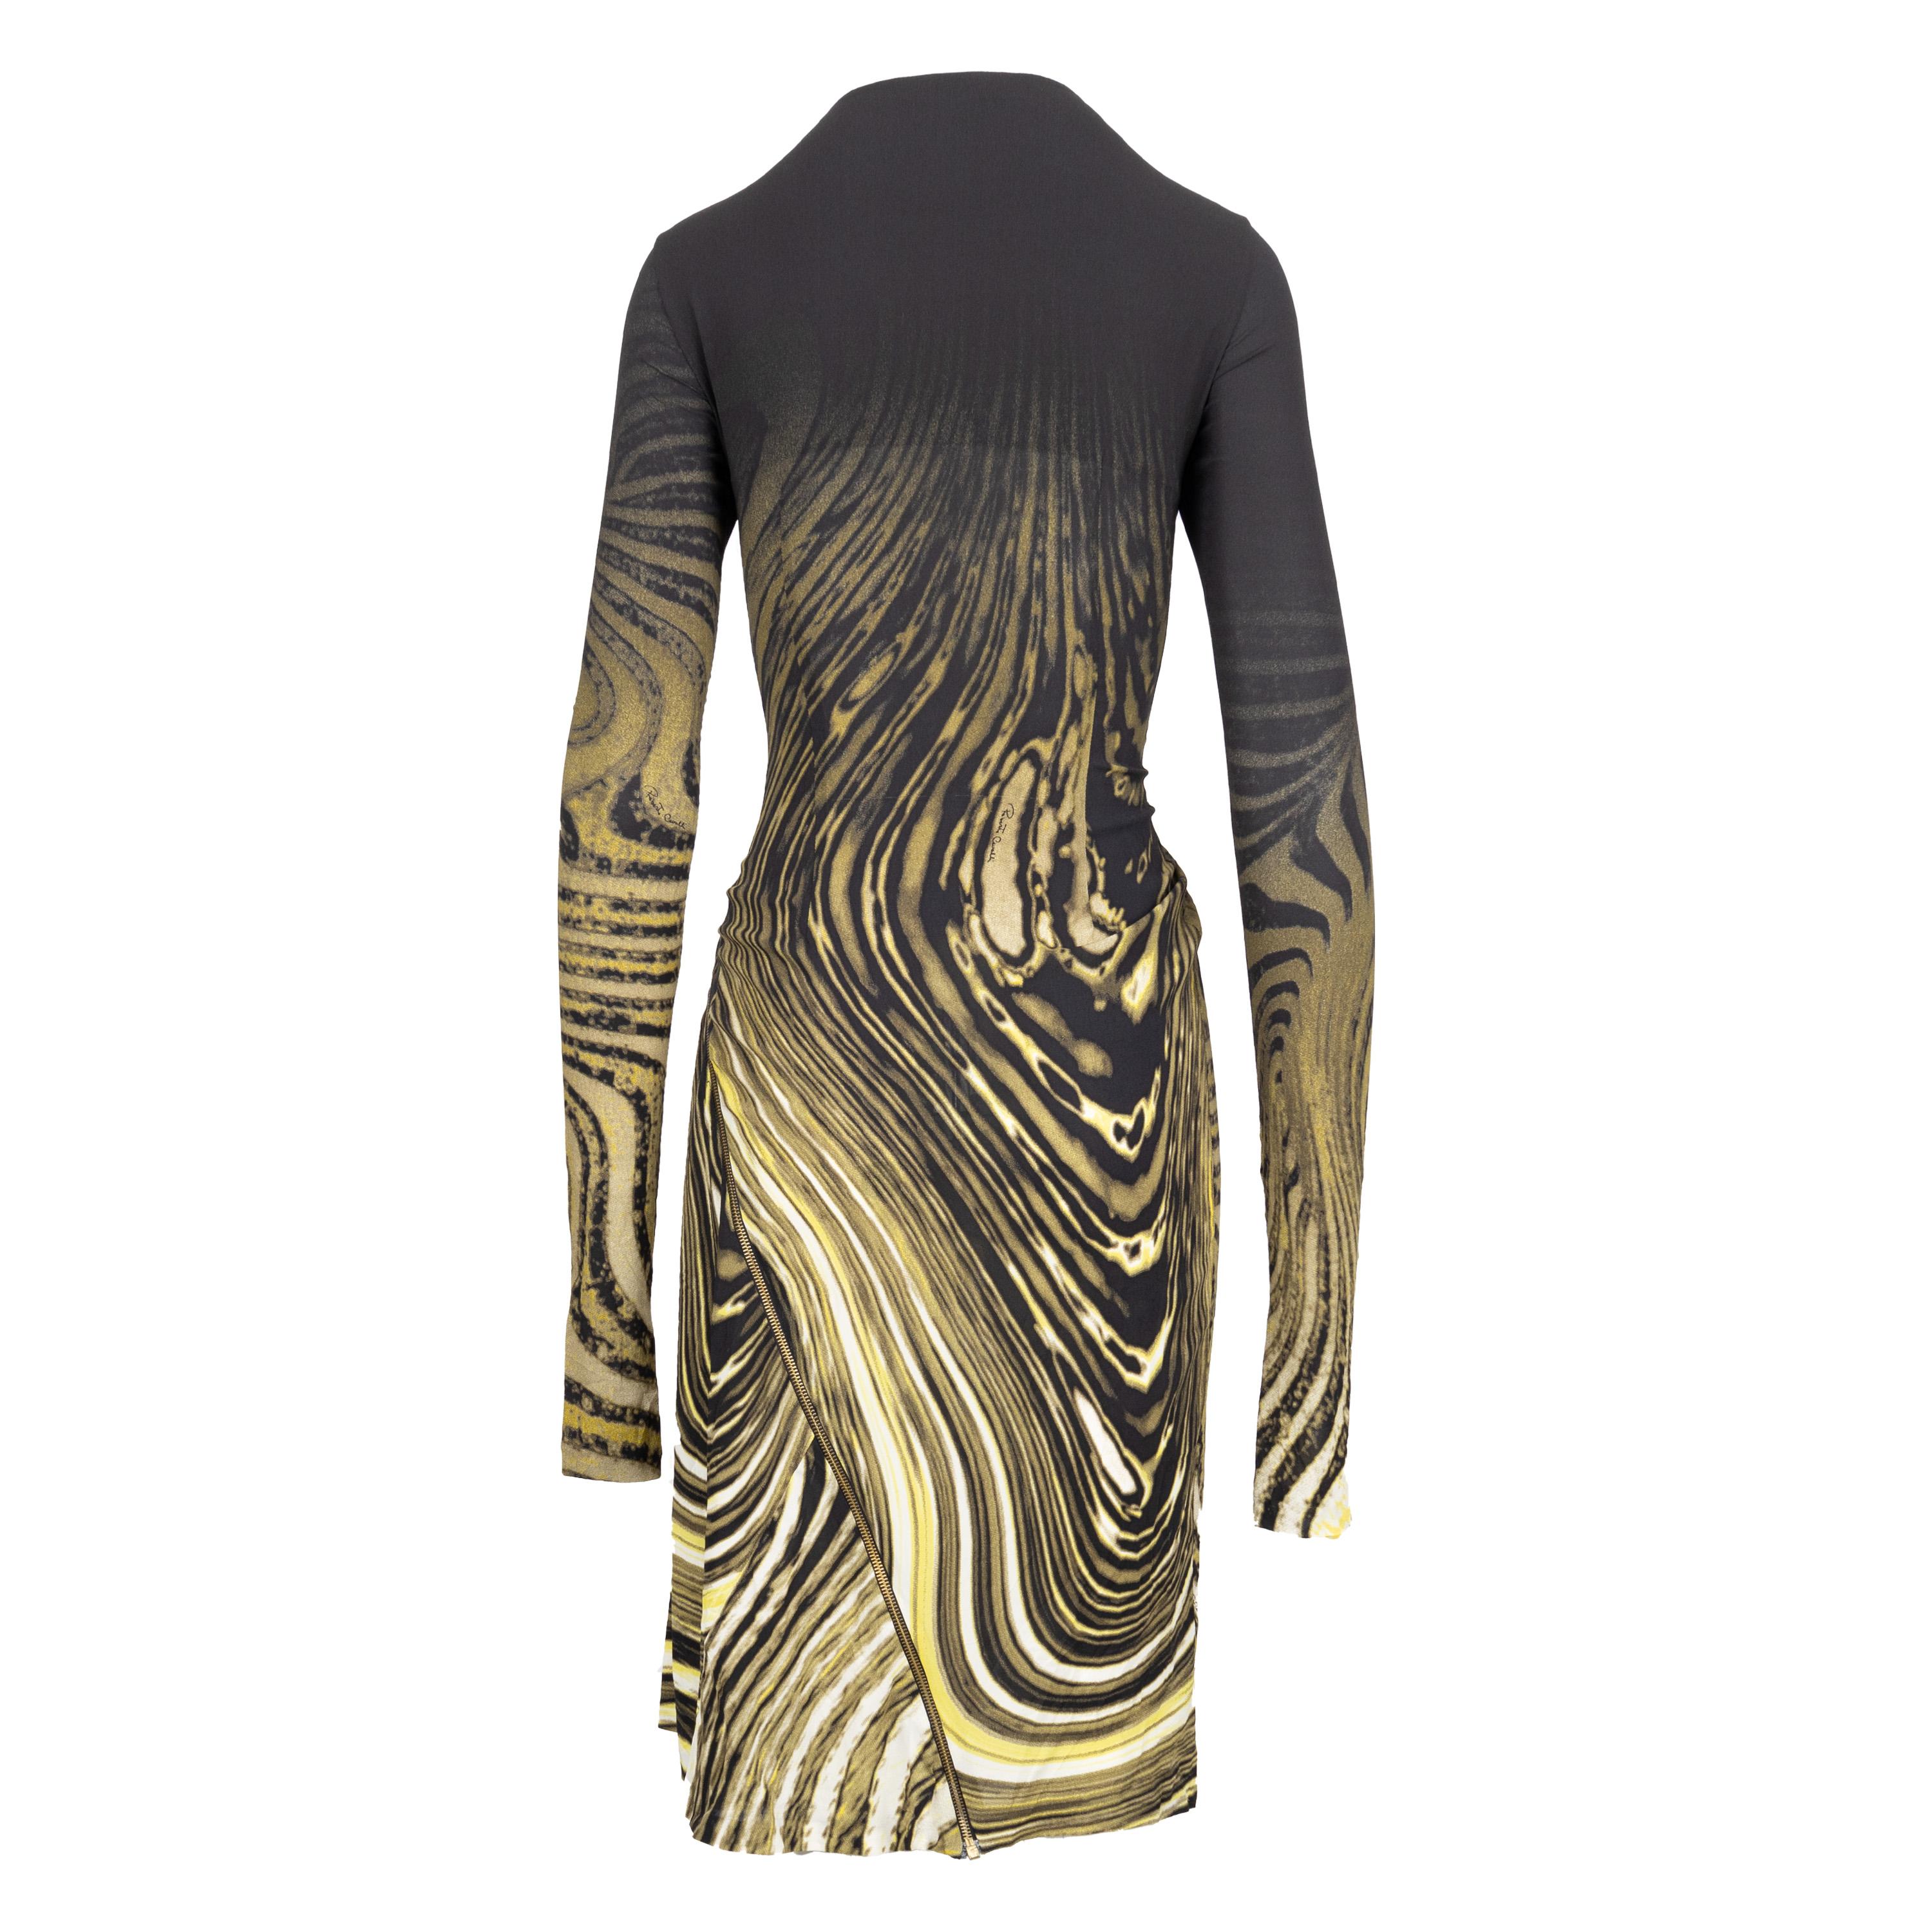 This Roberto Cavalli Animalier Print Dress features a swirl animalier print with a striking black ombre upper, and a gold-toned adjustable front zipper for a versatile look. The long fitted sleeve and form-fitting silhouette provide a flattering fit